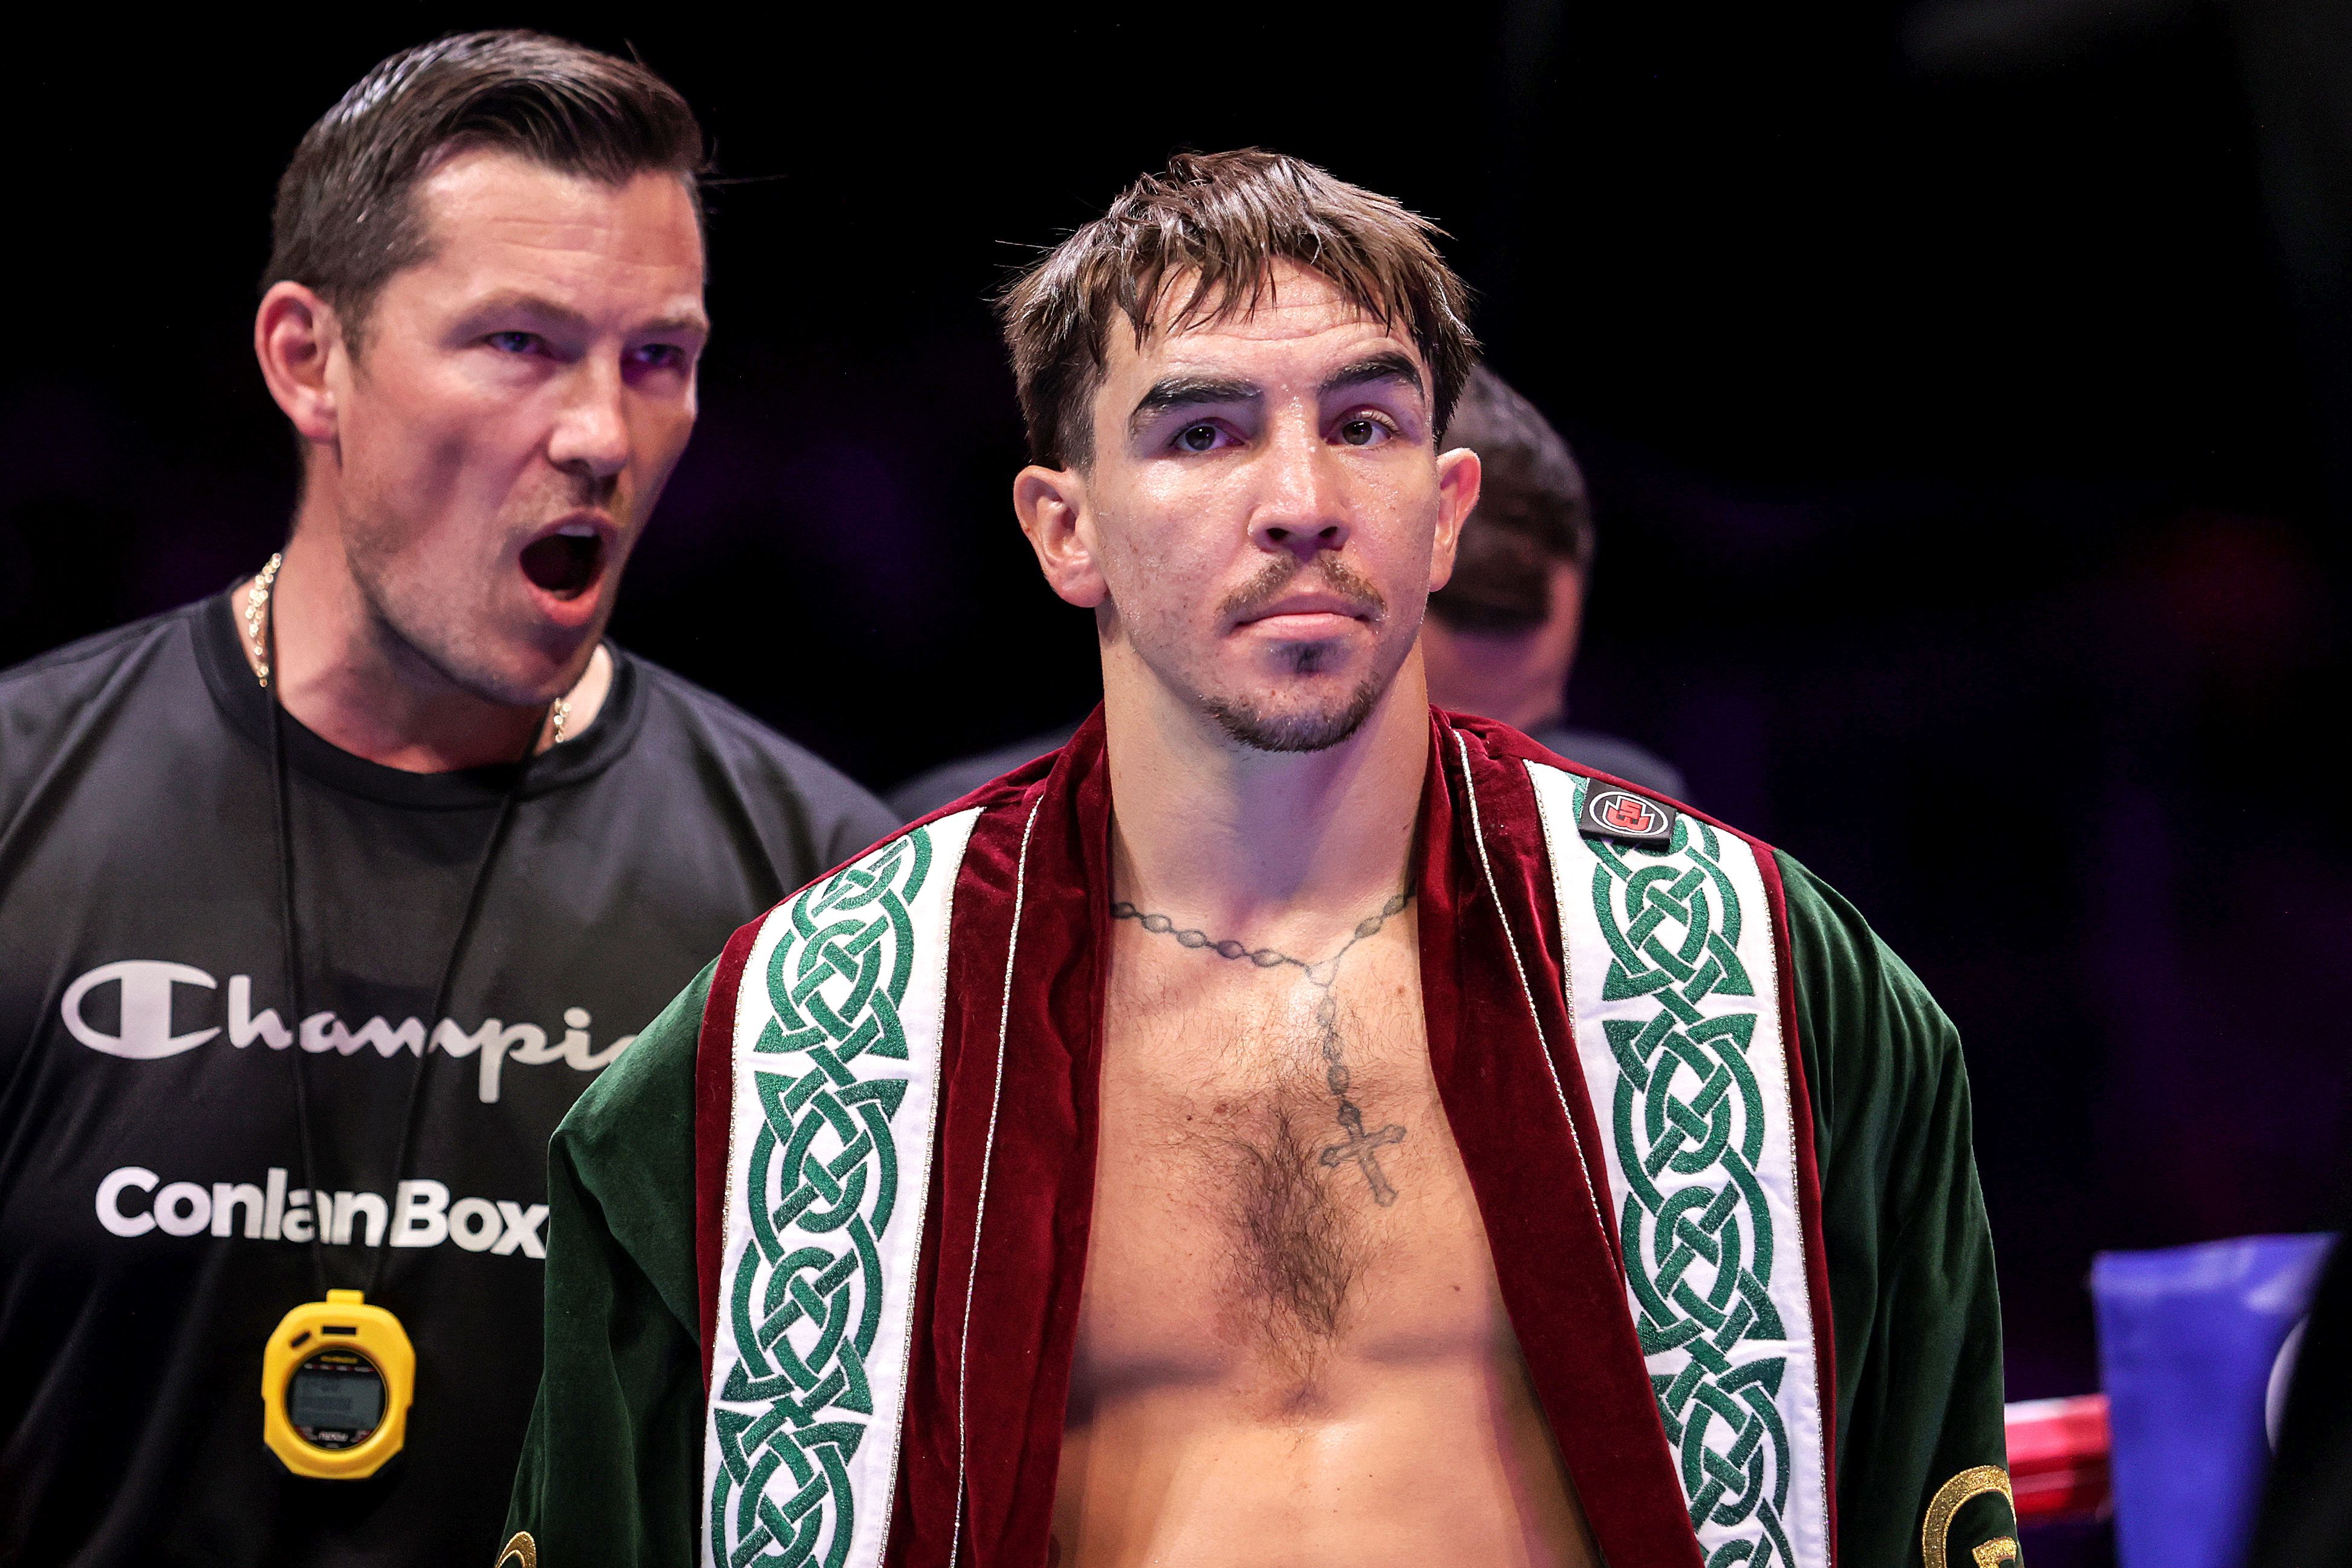 Michael Conlan will have home advantage at the SSE Arena on May 27 against IBF featherweight champion Luis Alberto Lopez 